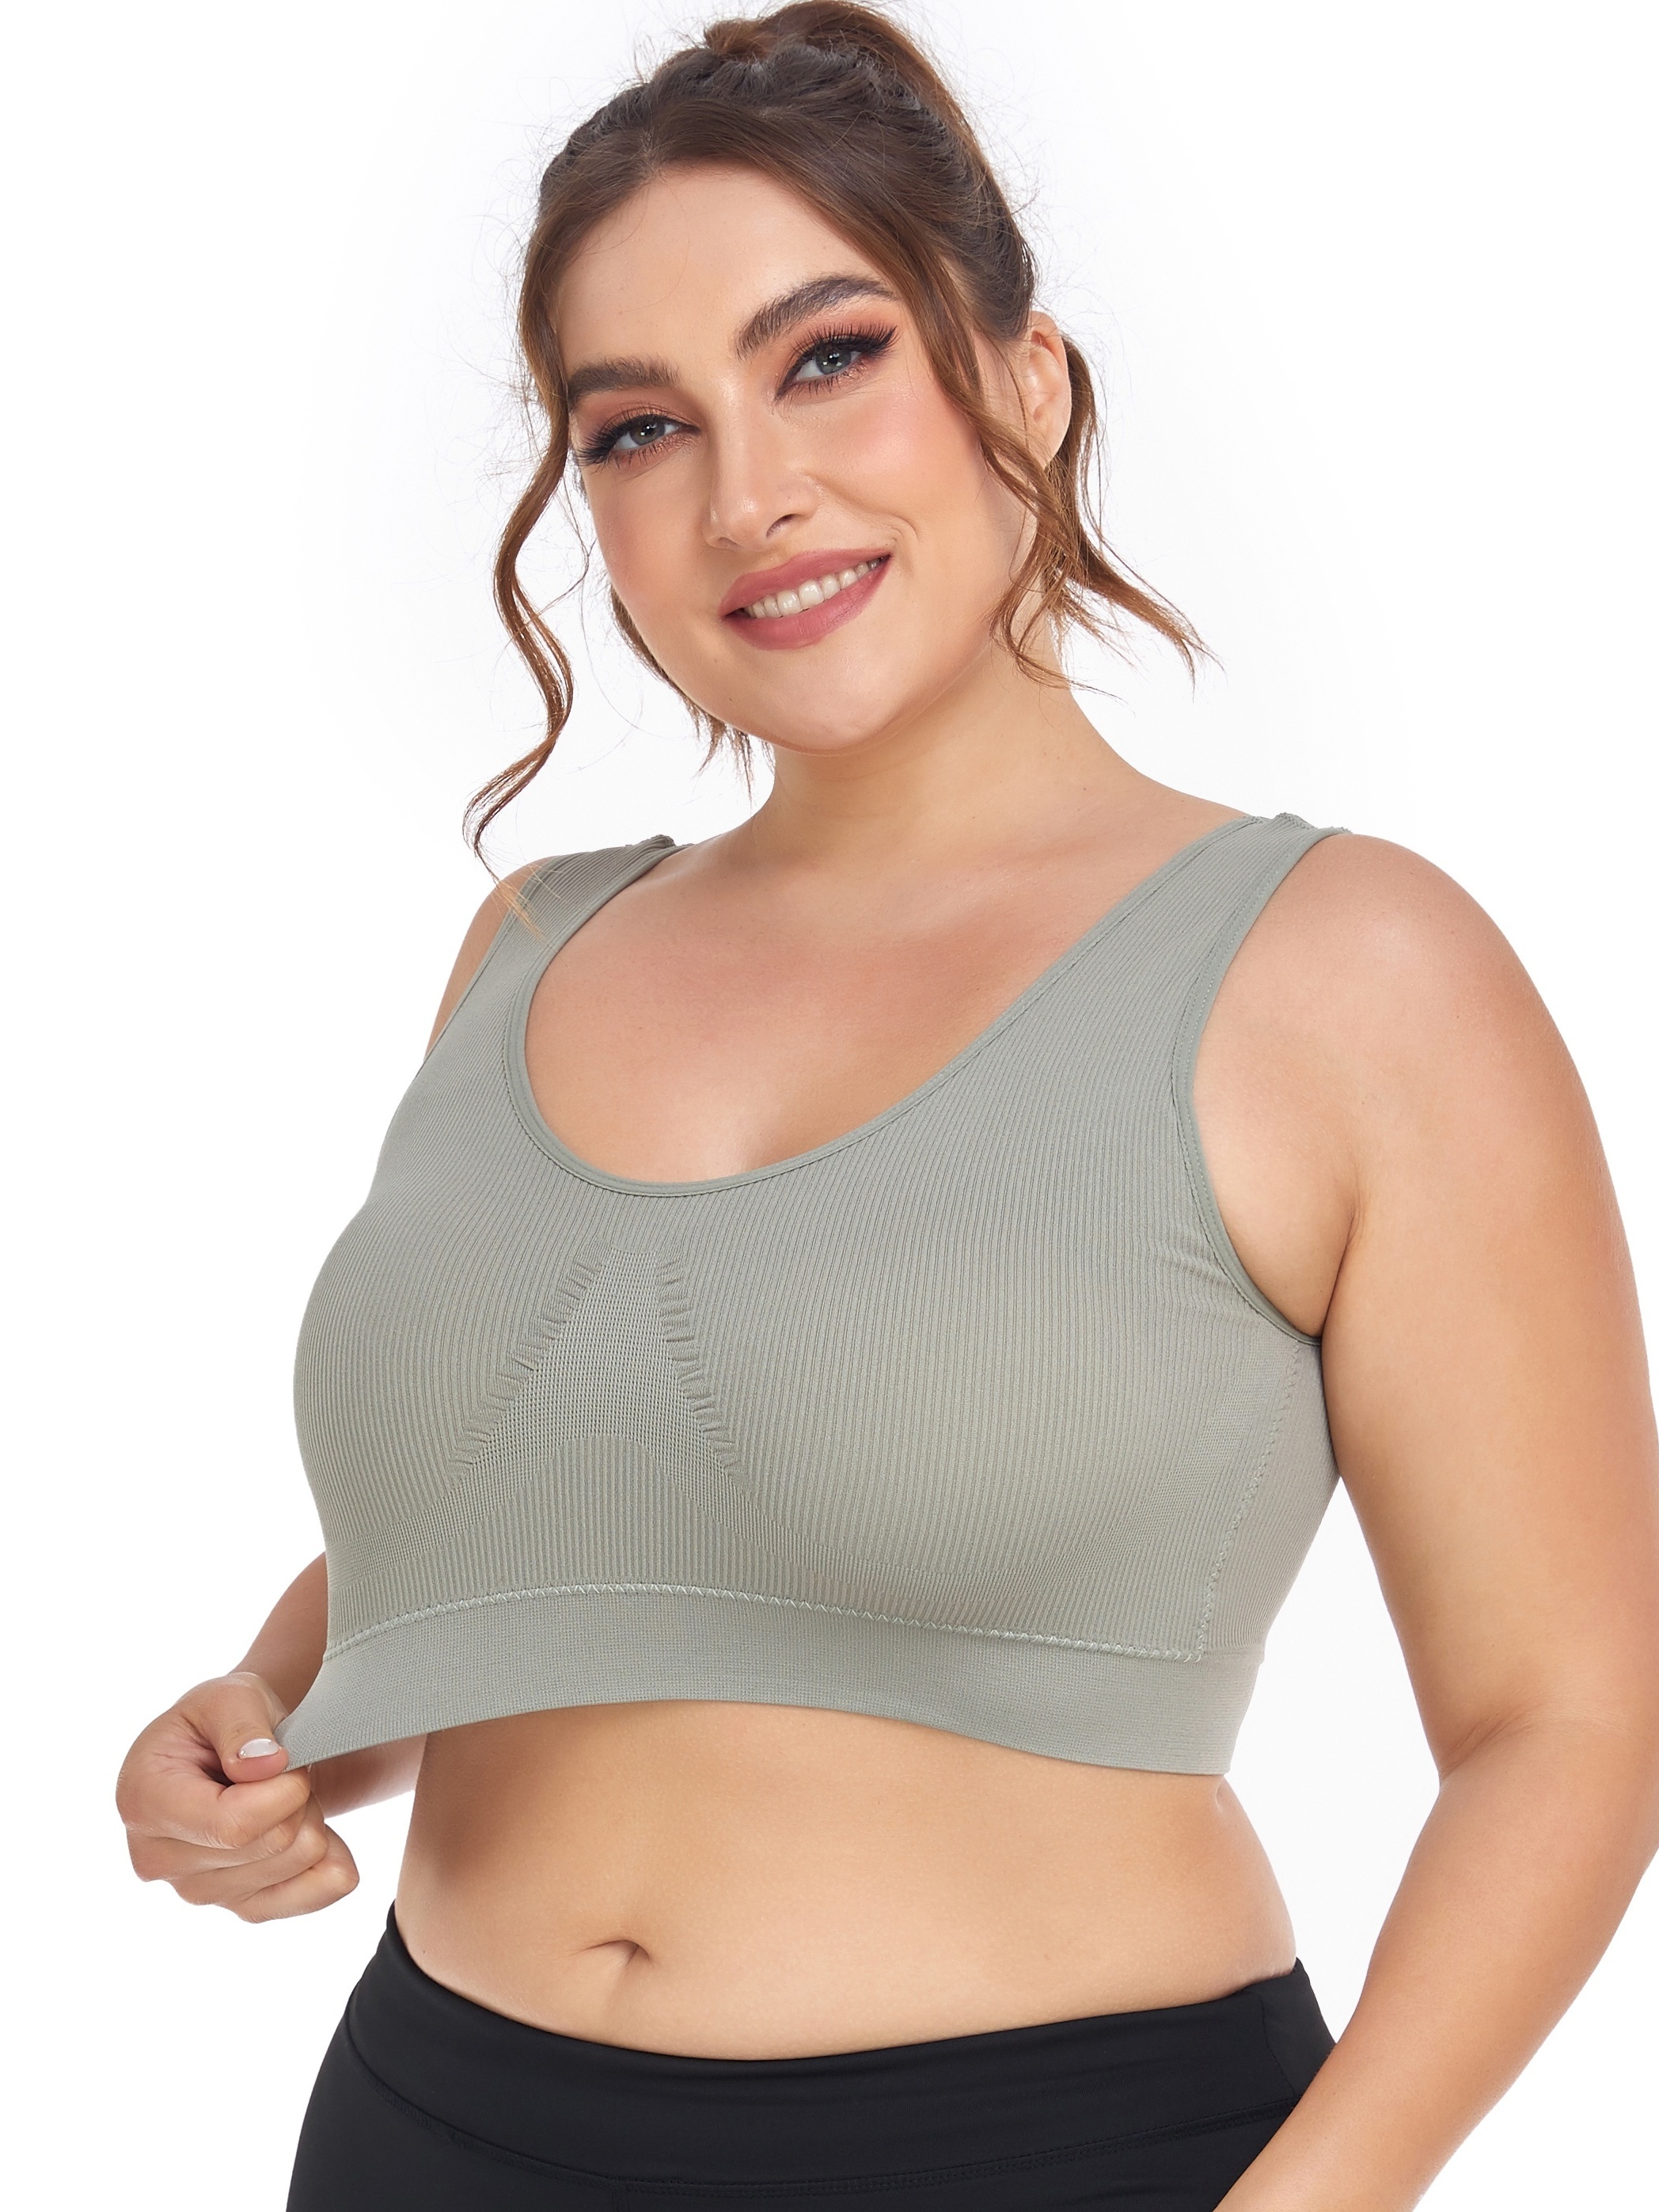 Knosfe Plus Size Sports Bra for Women Seamless Full-Coverage T-Shirt Bra  Female Complexion L